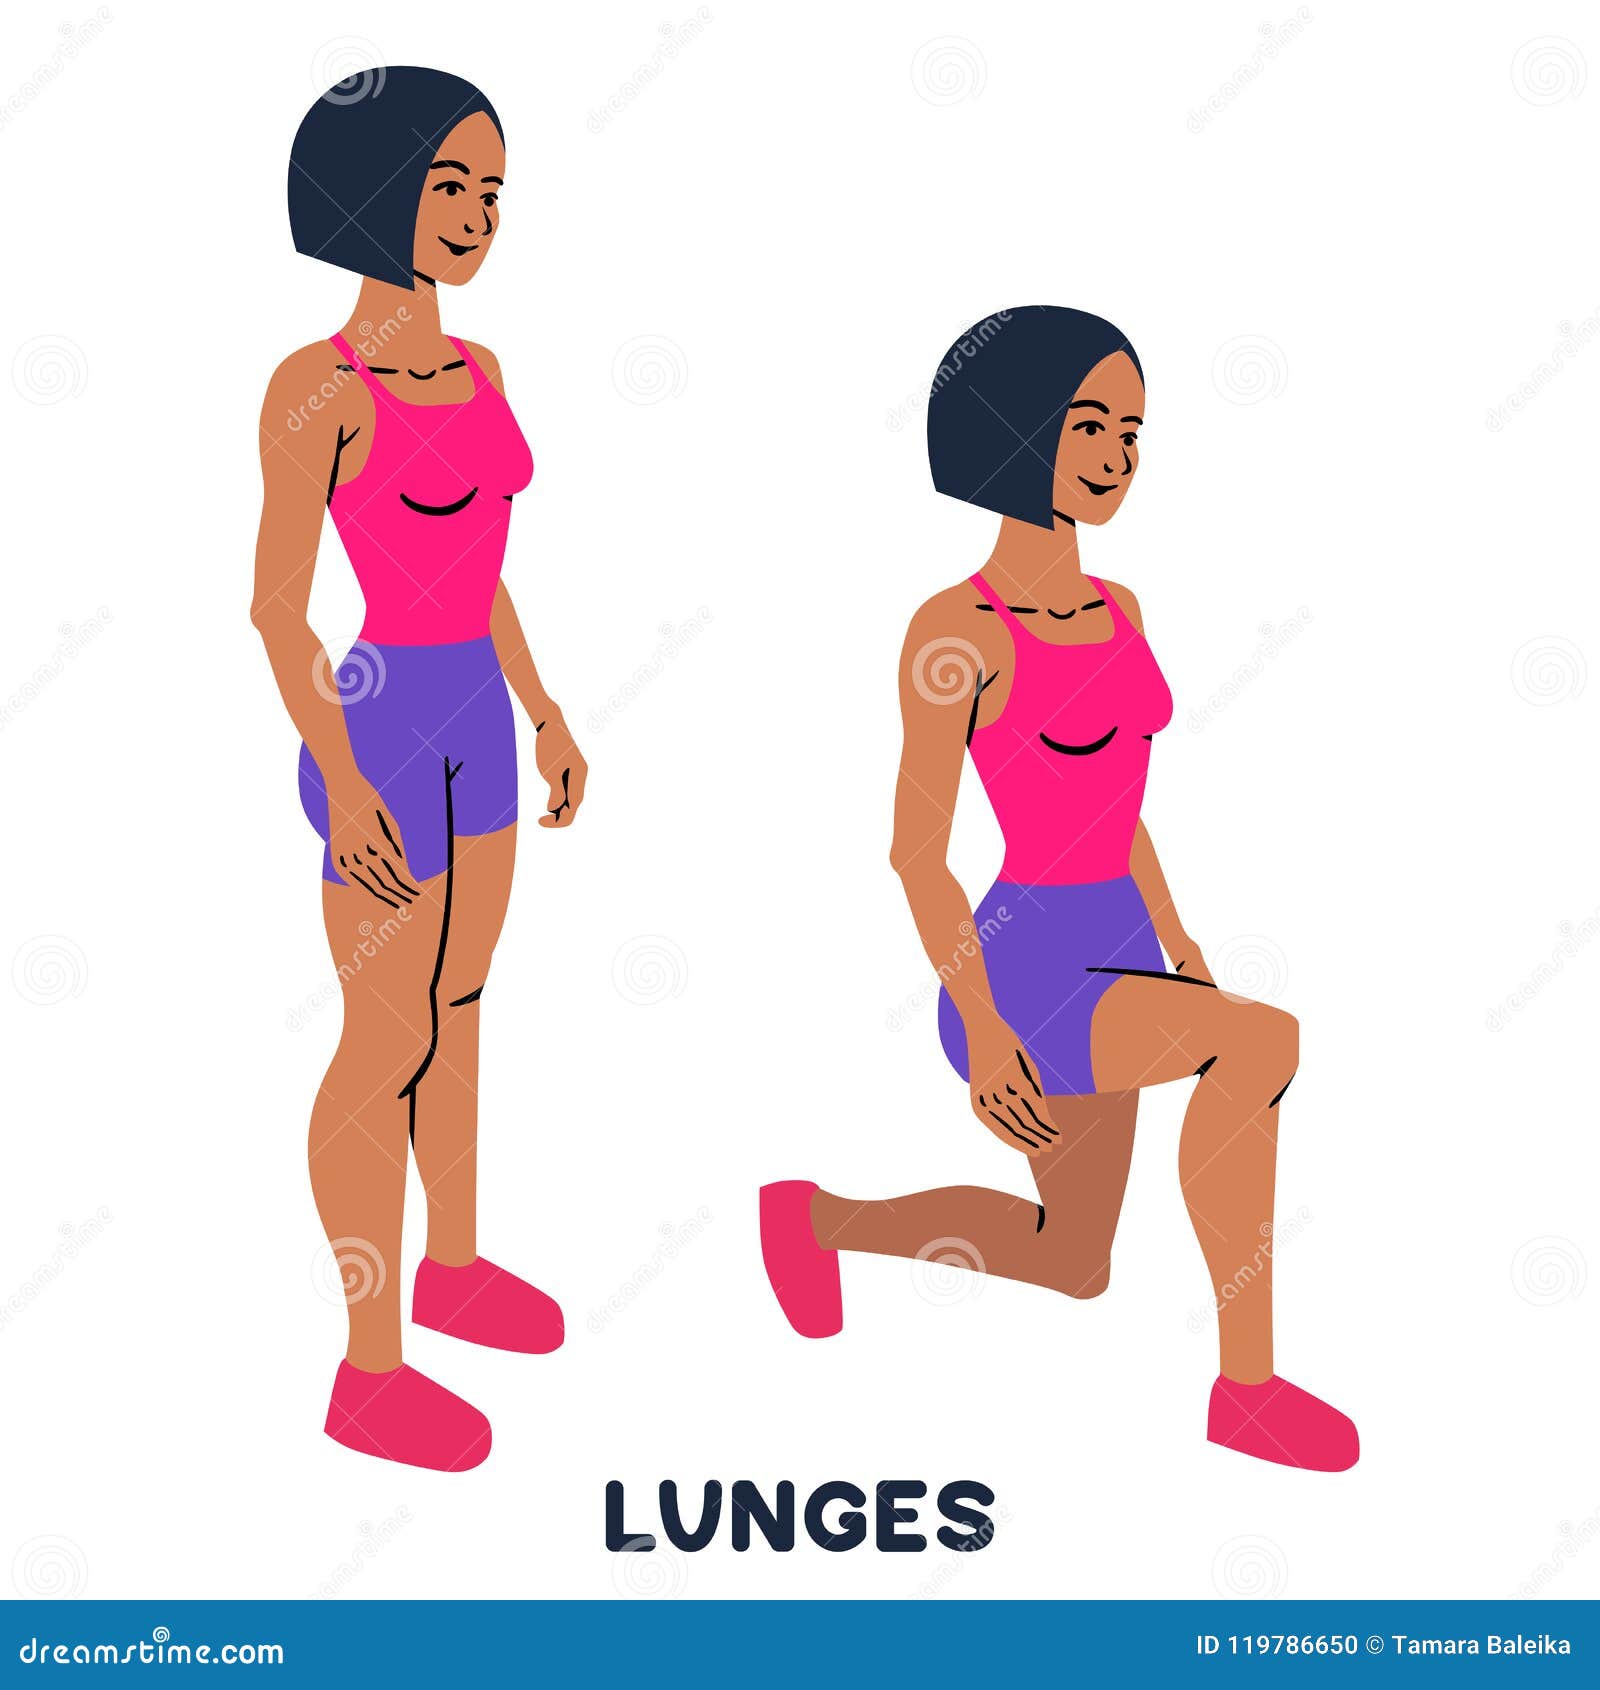 Lunges Stock Illustrations – 1,257 Lunges Stock Illustrations, Vectors &  Clipart - Dreamstime